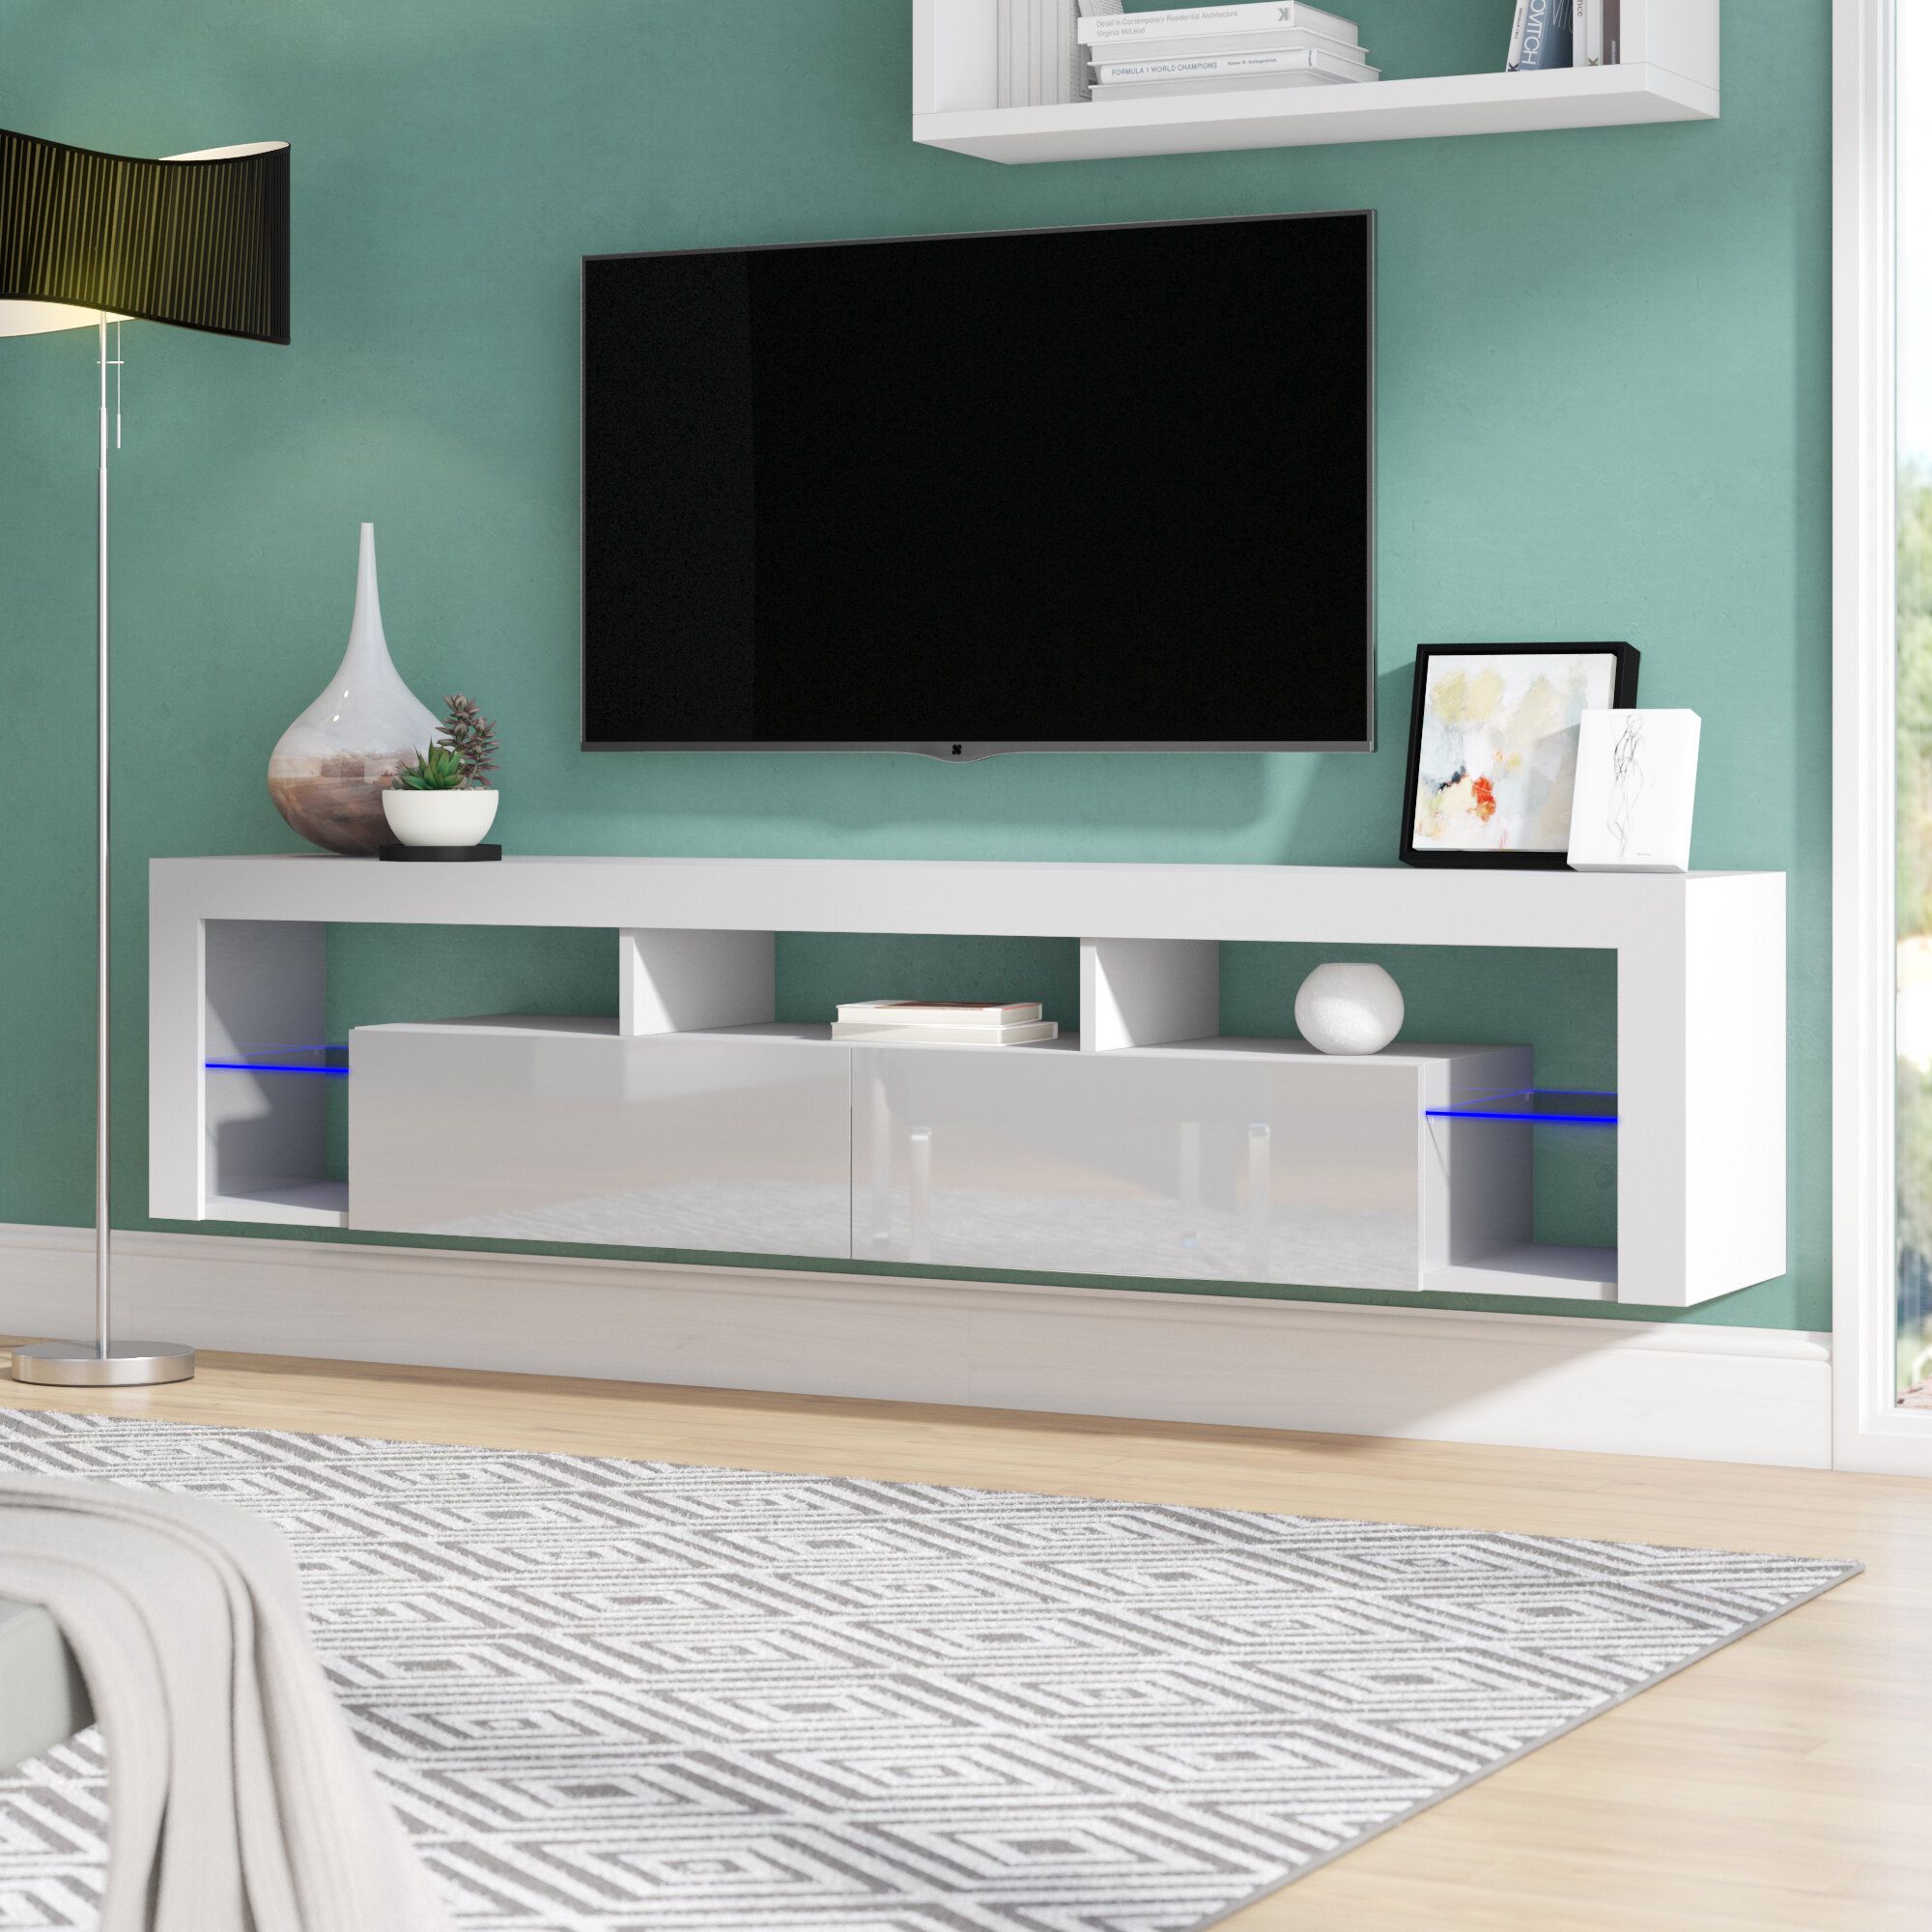 Orren Ellis Floating Milano Tv Stand For Tvs Up To 90" & Reviews | Wayfair In Floating Stands For Tvs (Photo 12 of 15)